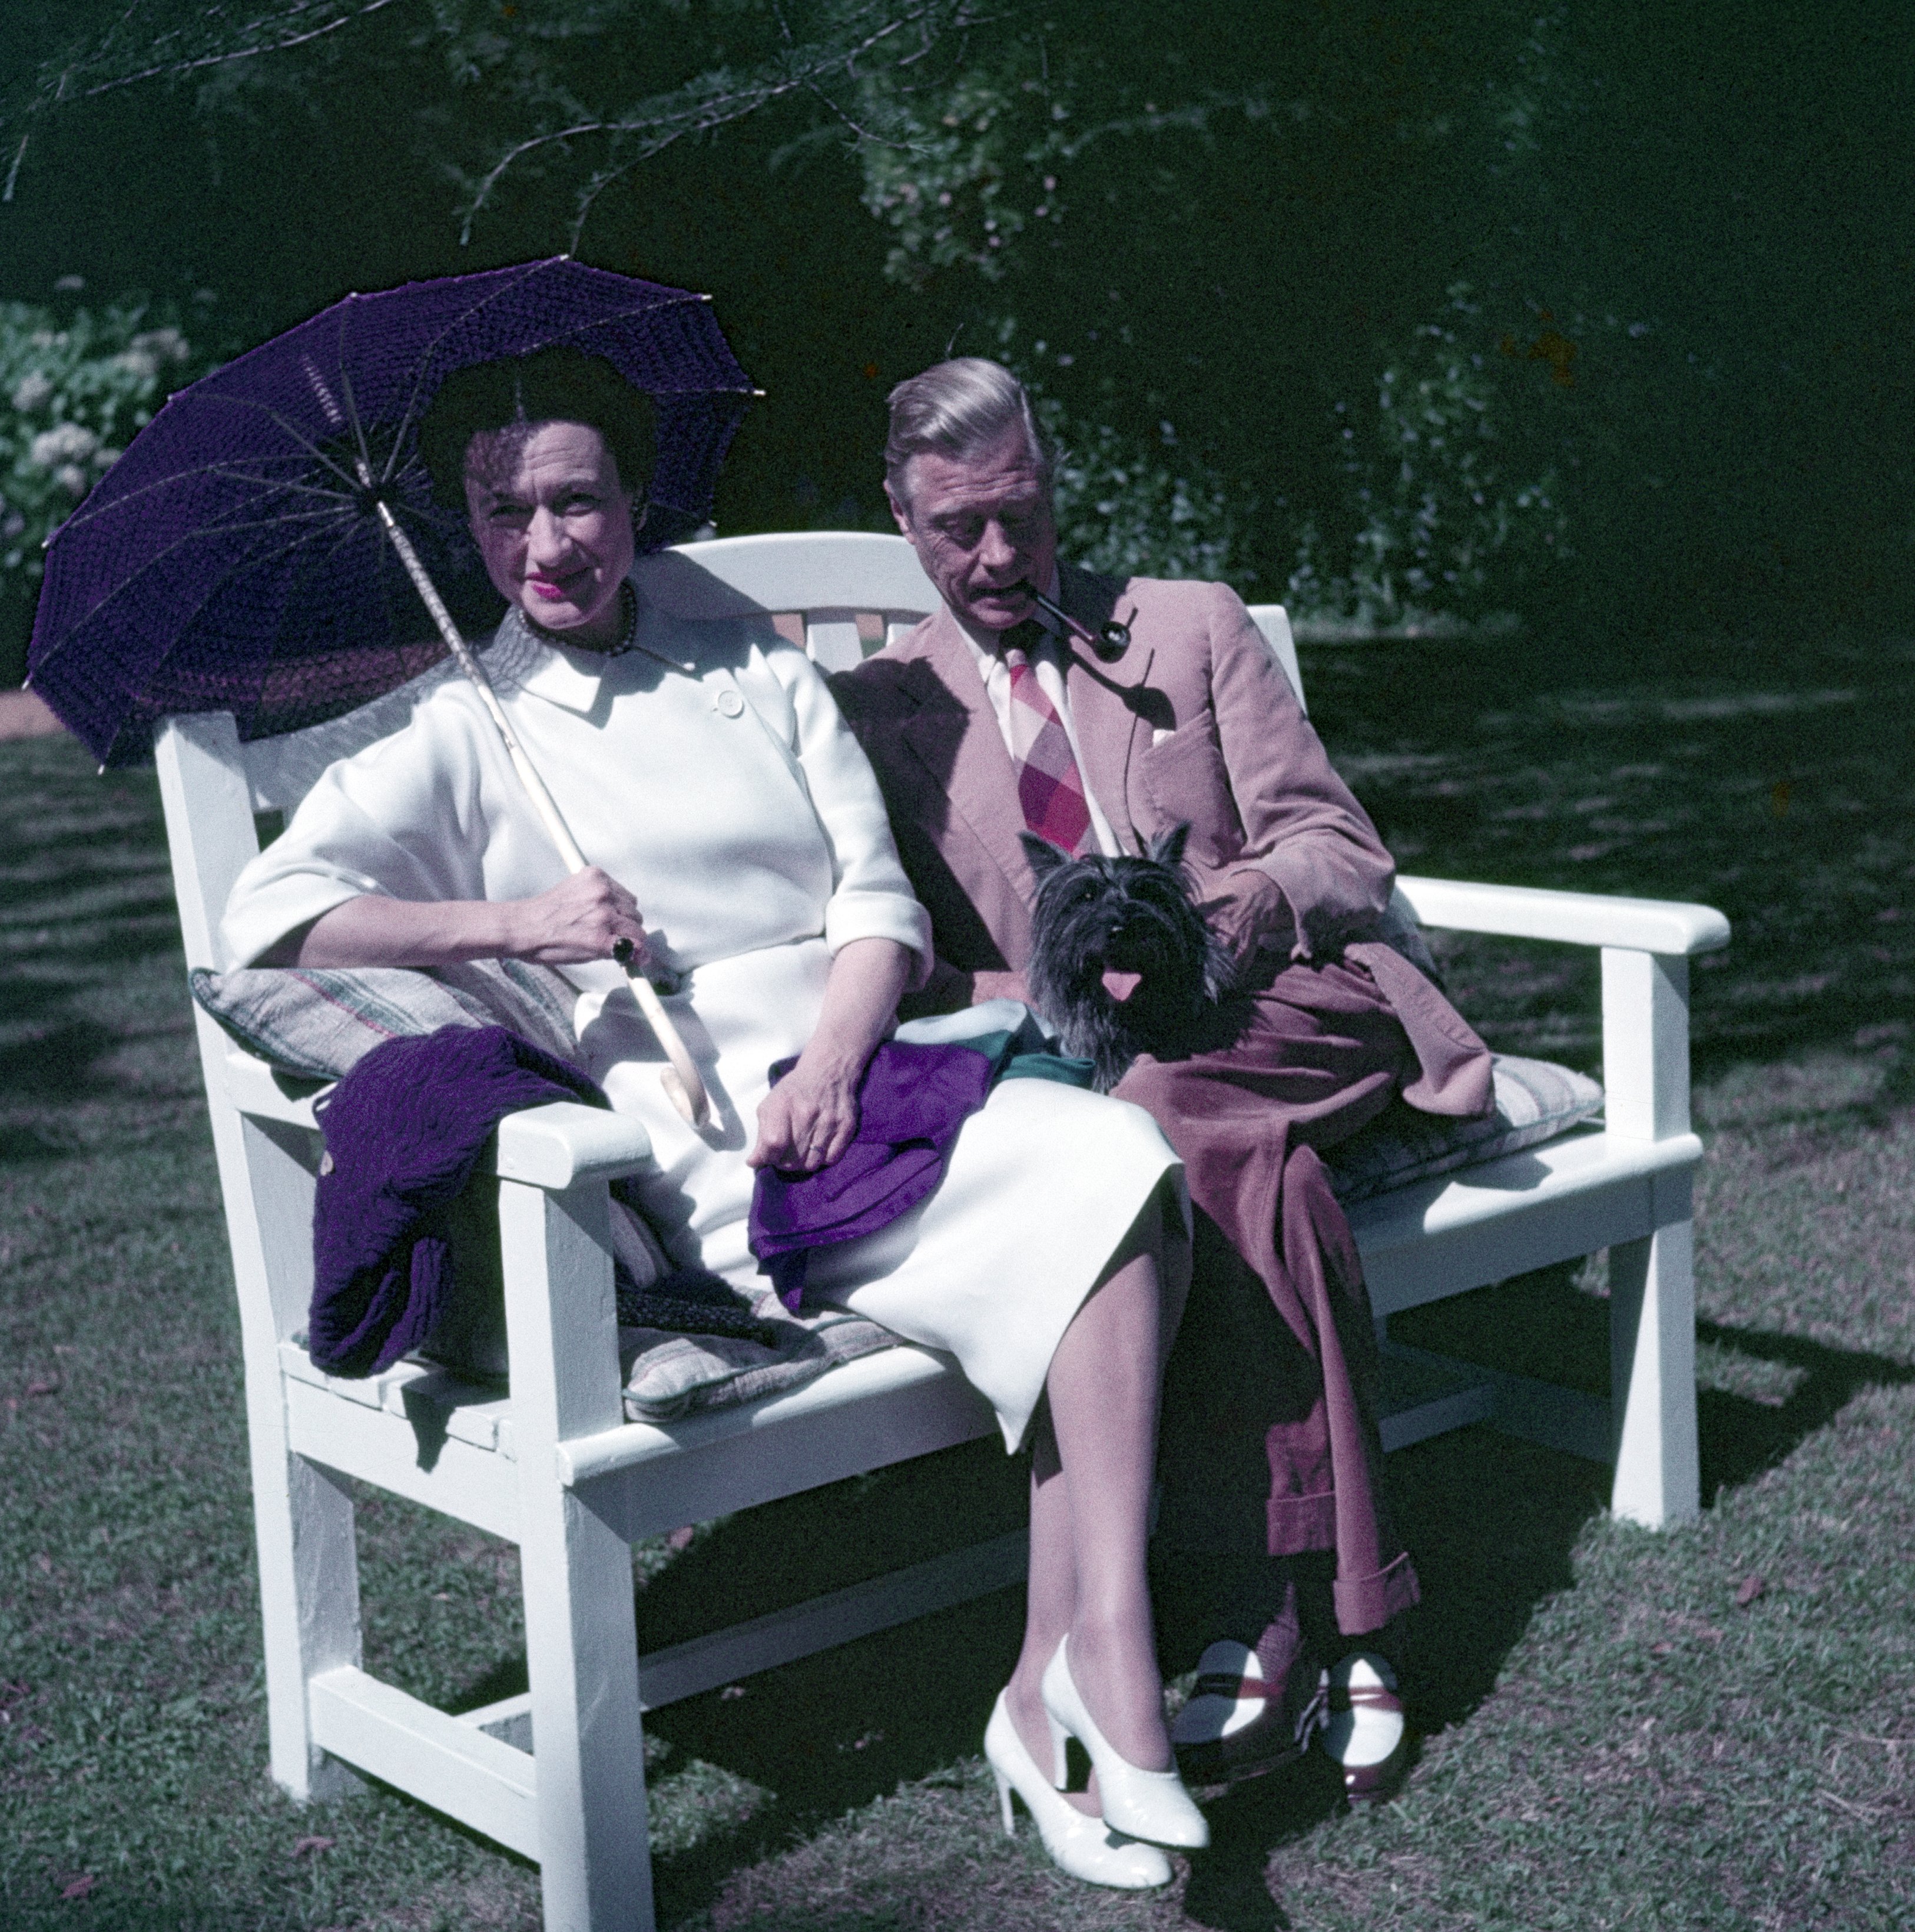 The Duke and Duchess of Windsor at a villa in Biarritz, in October 1951. | Source: Getty Images